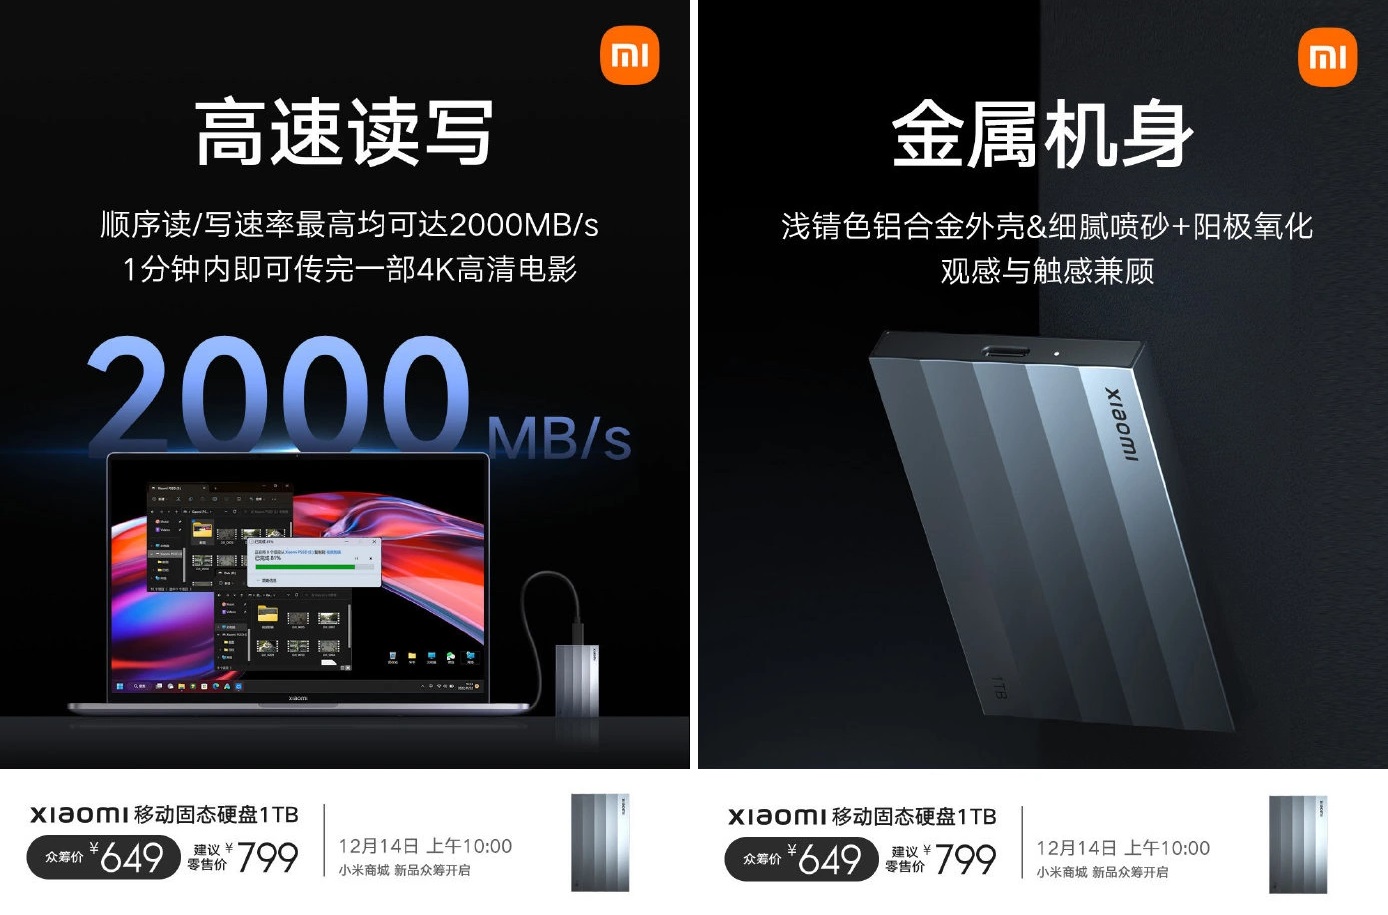 Xiaomi introduced a 1TB SSD for smartphones and computers